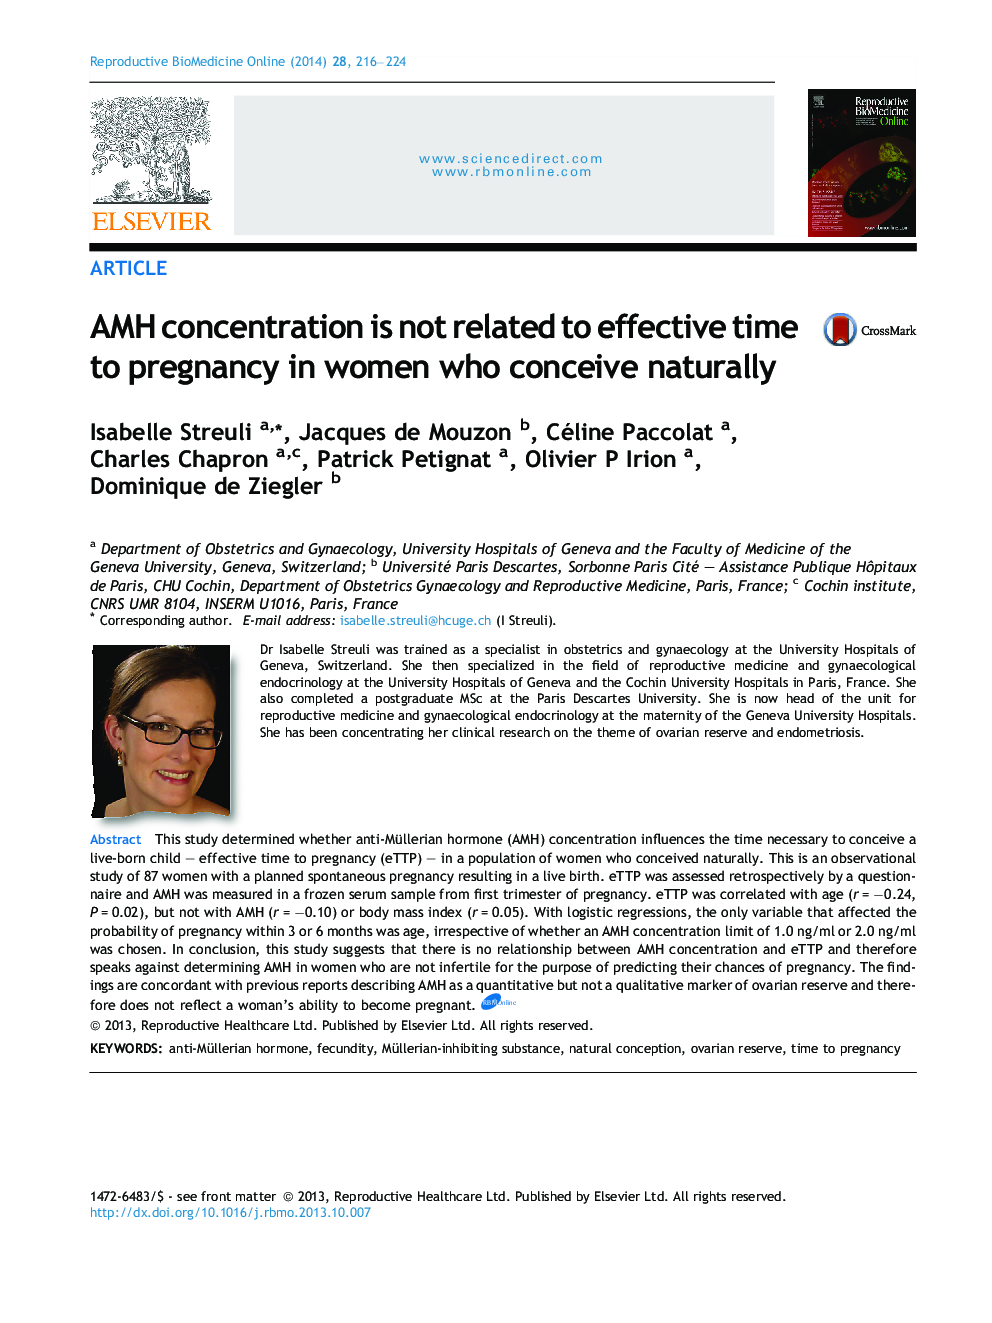 AMH concentration is not related to effective time to pregnancy in women who conceive naturally 